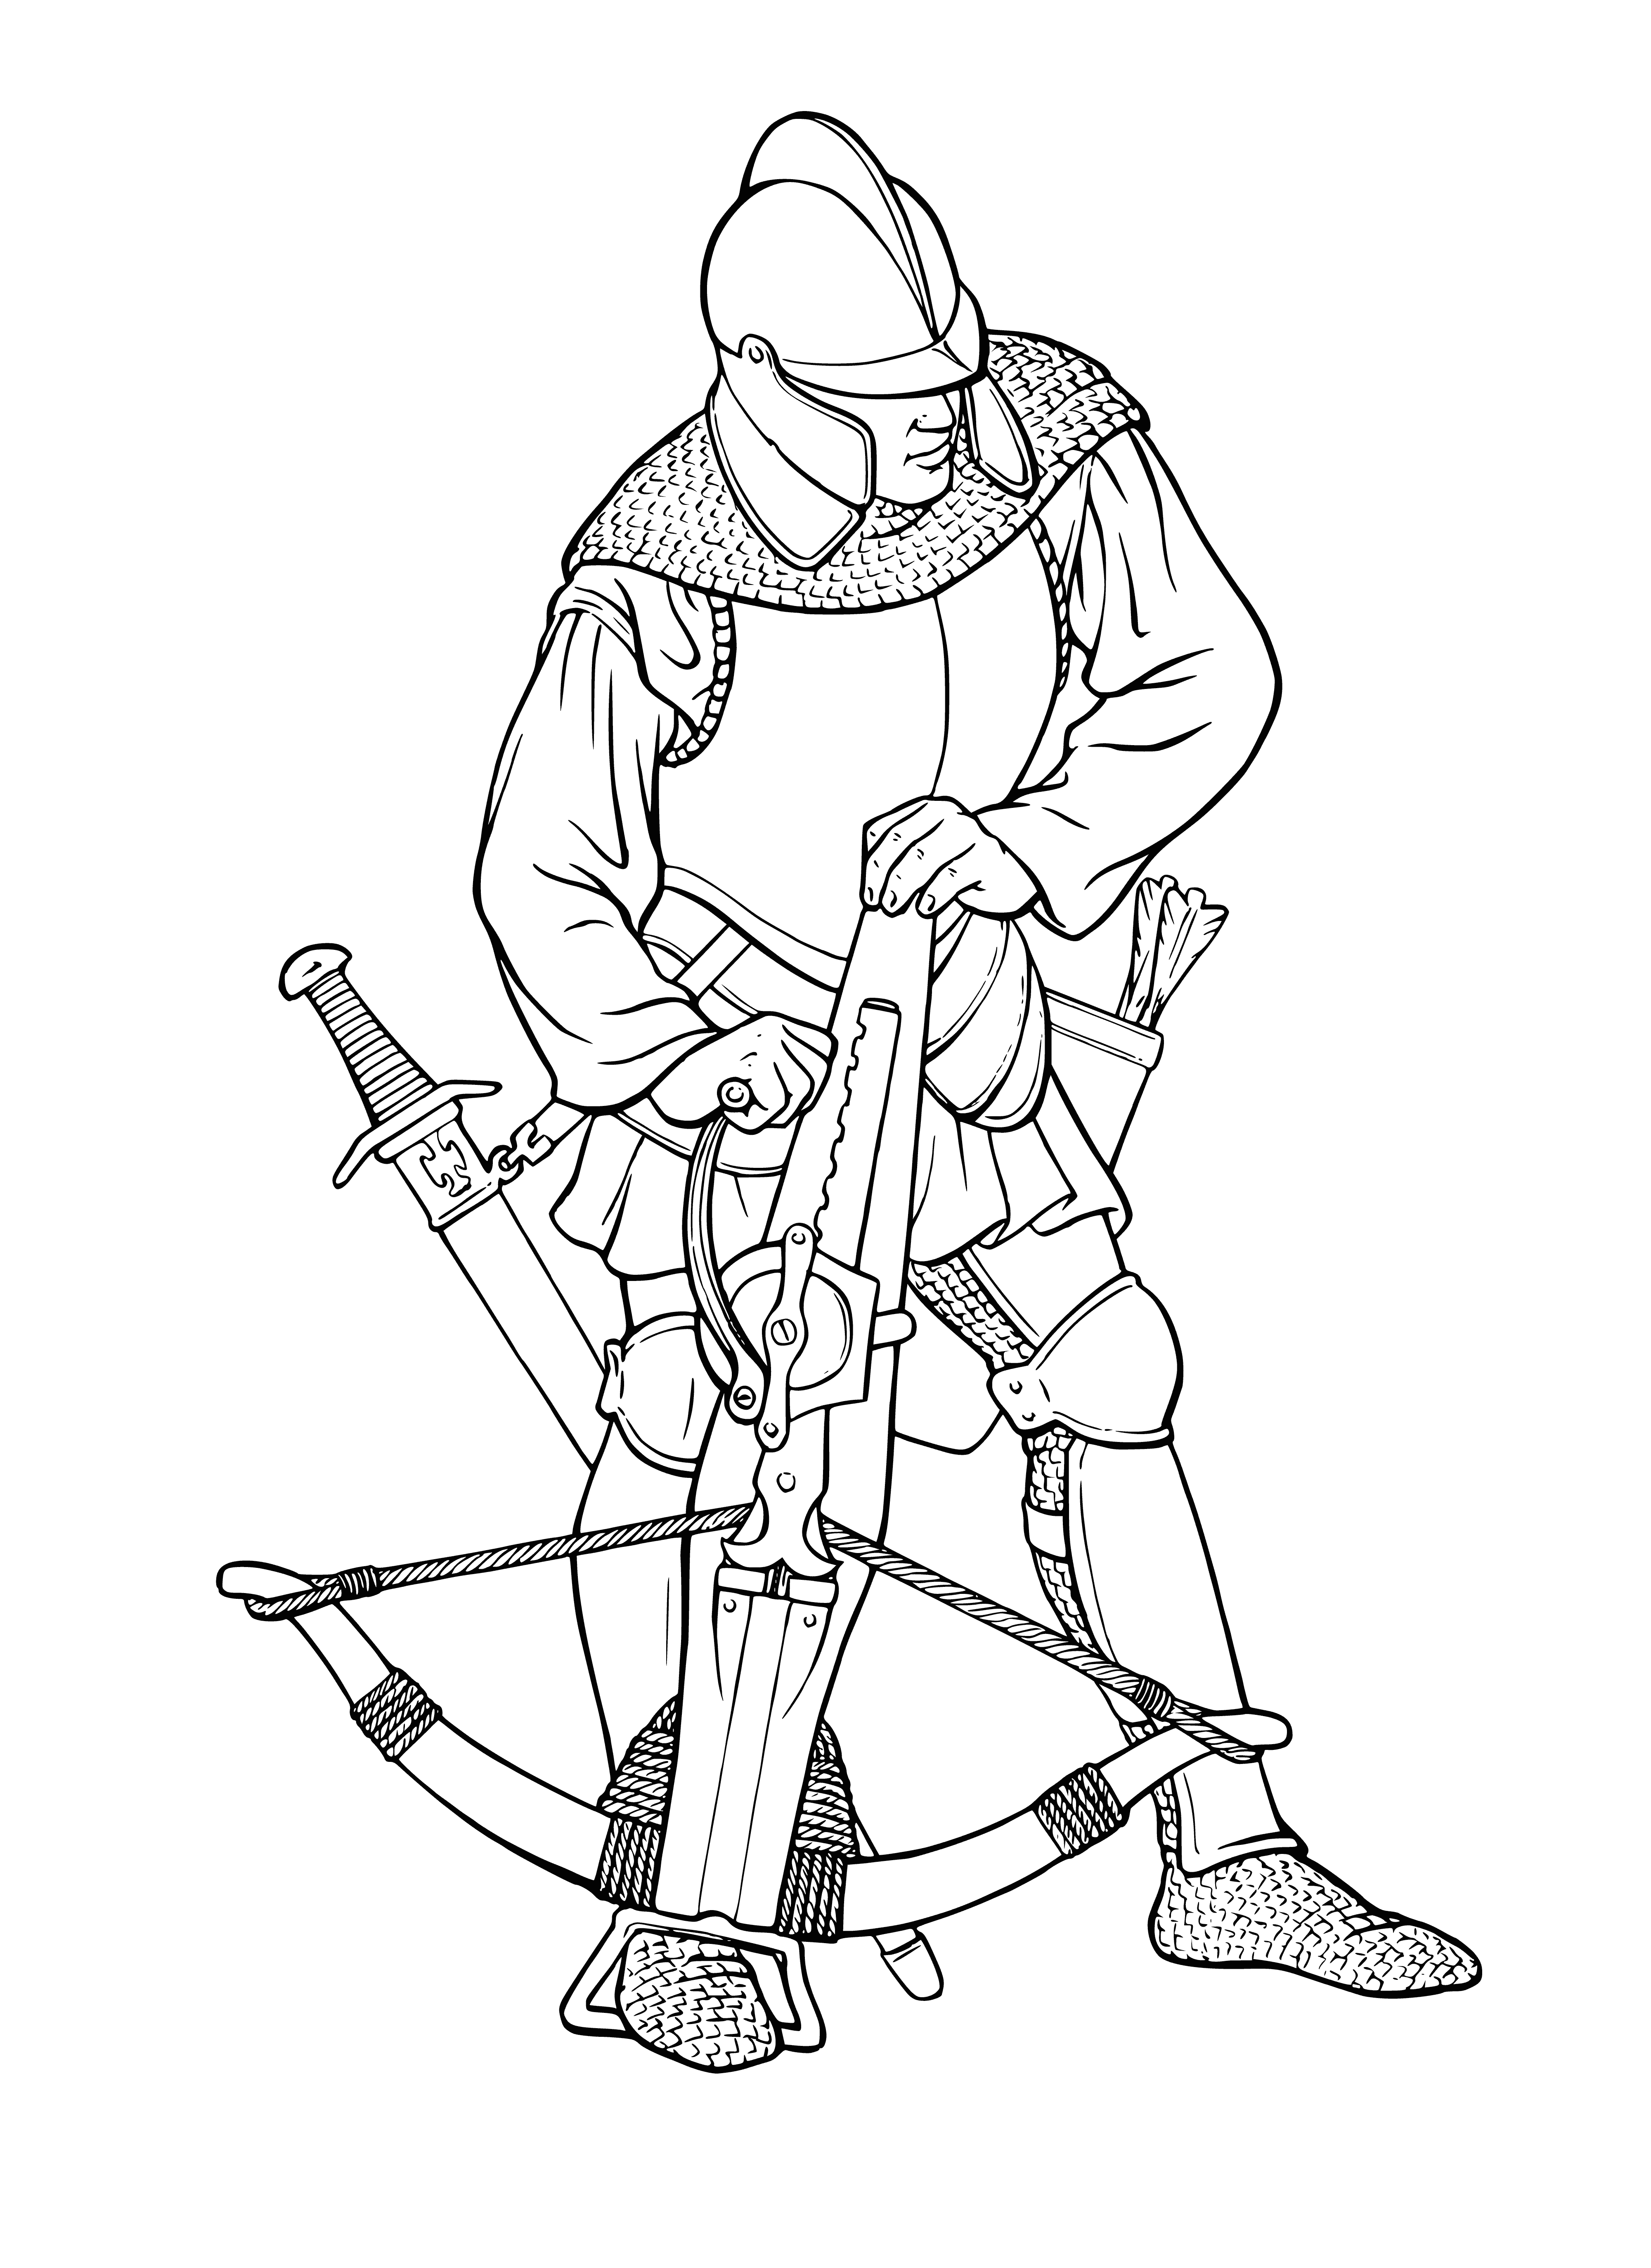 coloring page: A brave warrior stands ready for battle, crossbow and shining armor in hand, sword at their side.